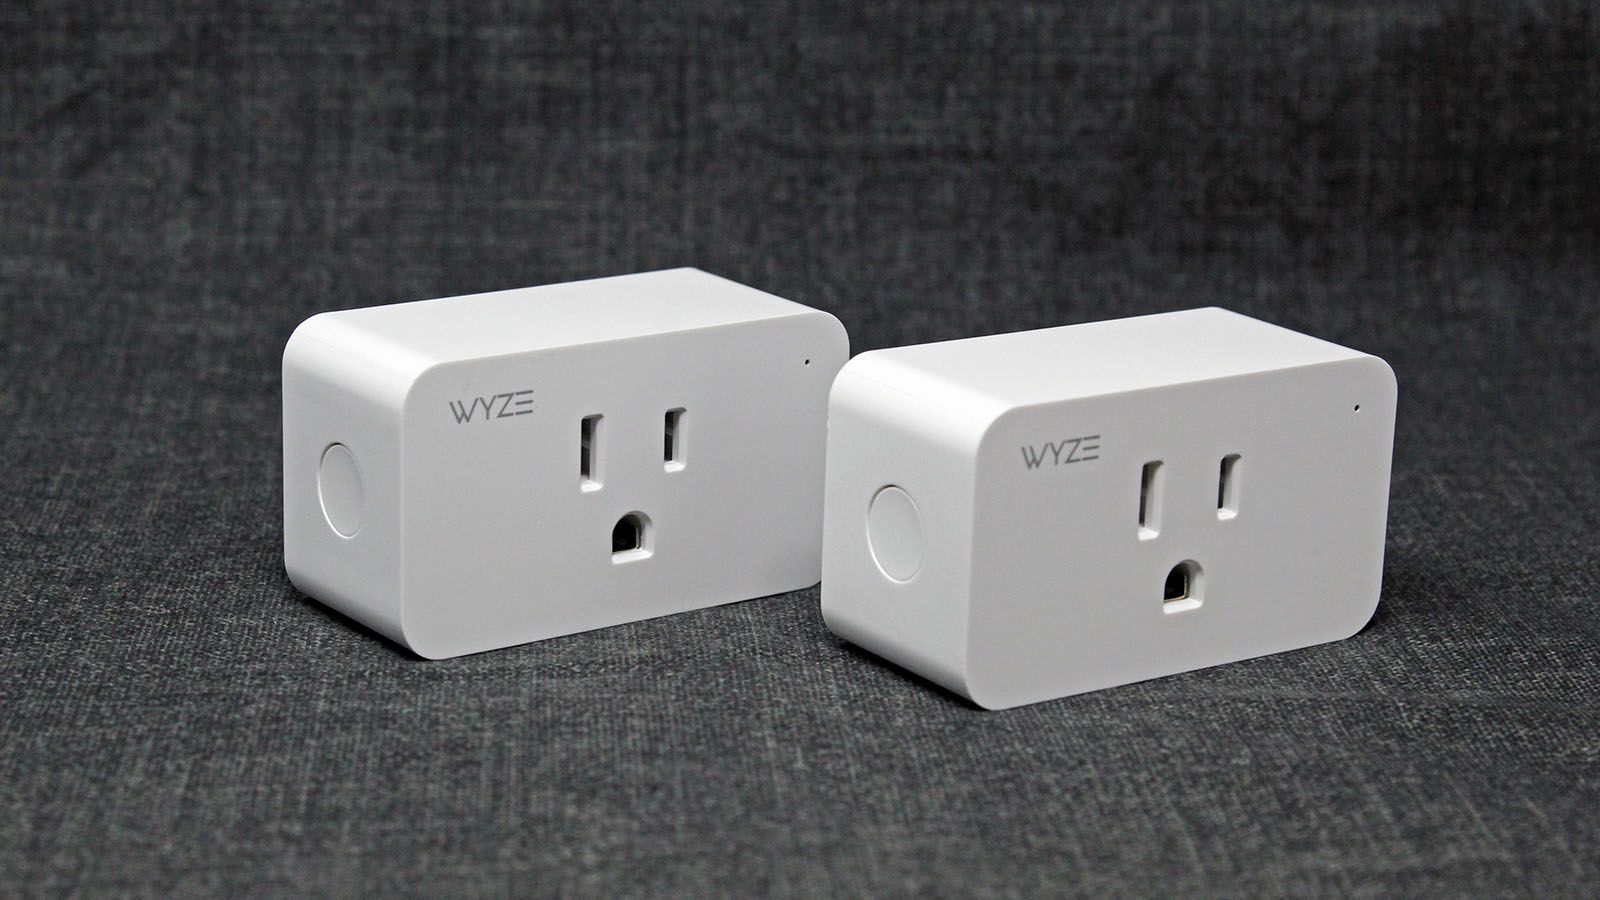 A pair of Wyze smart plugs.